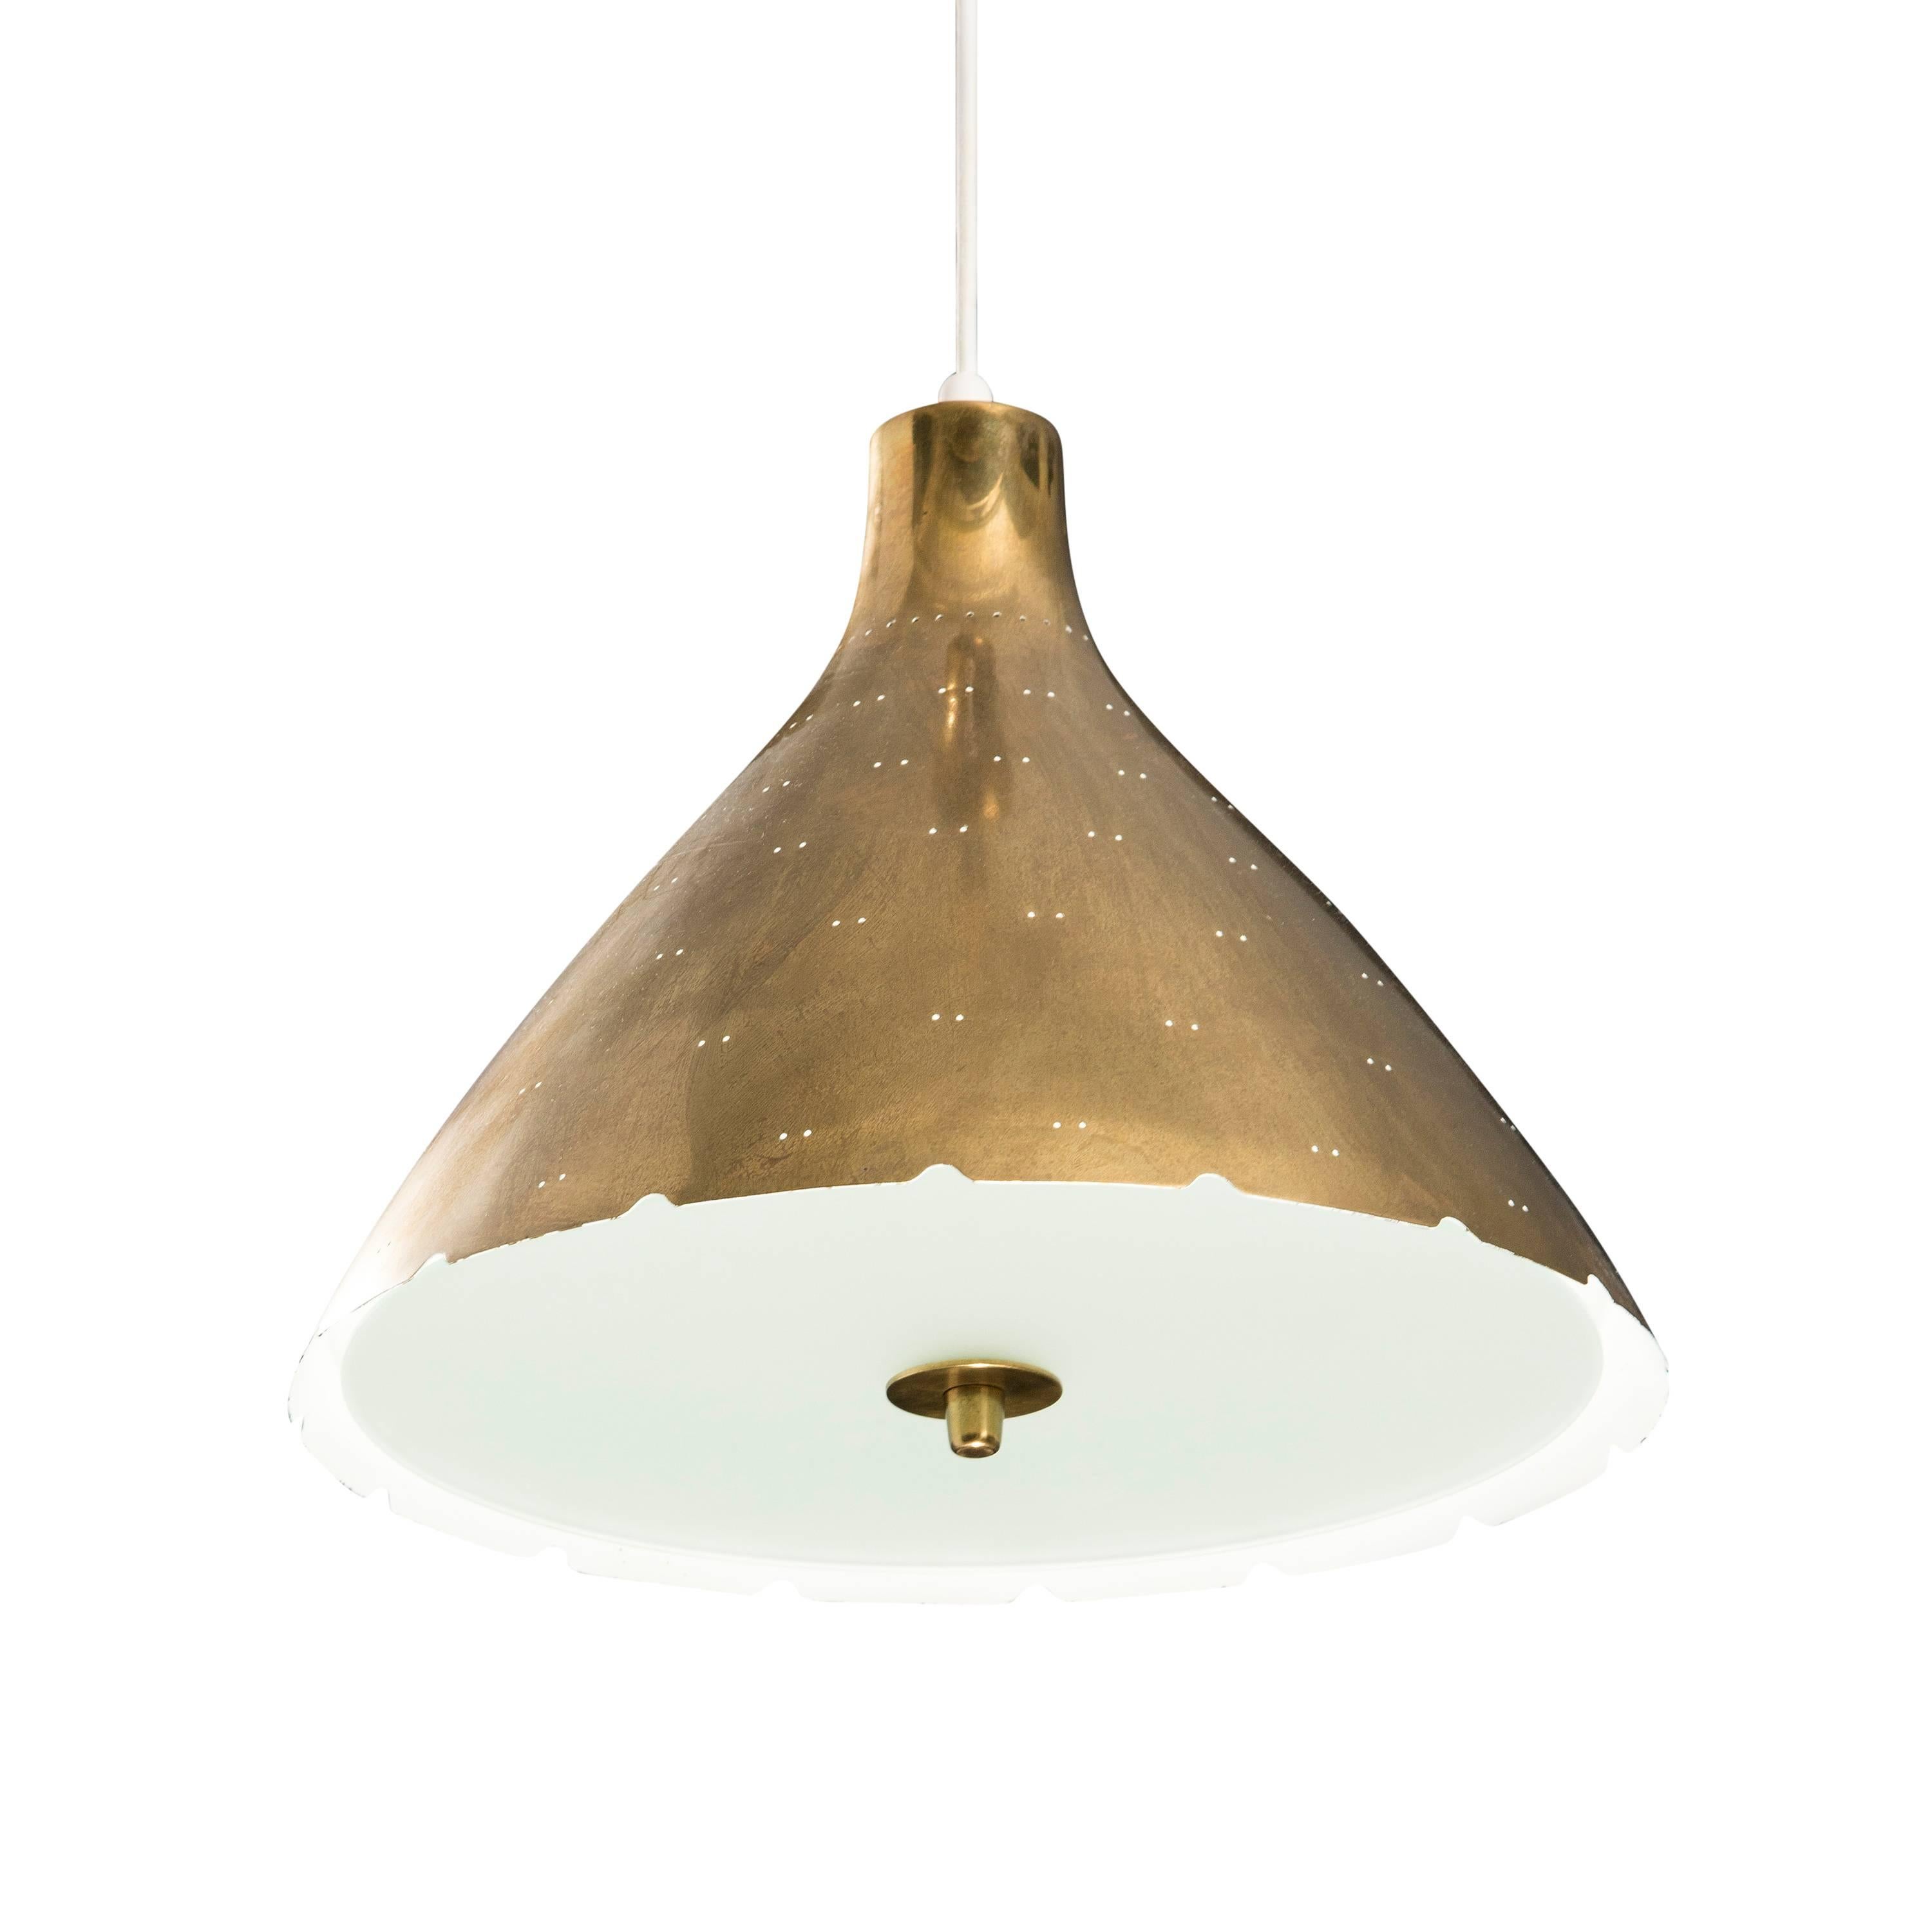 Paavo Tynell ceiling lamp. Brass and frosted glass. Designed for Taito Oy in the 1940s.